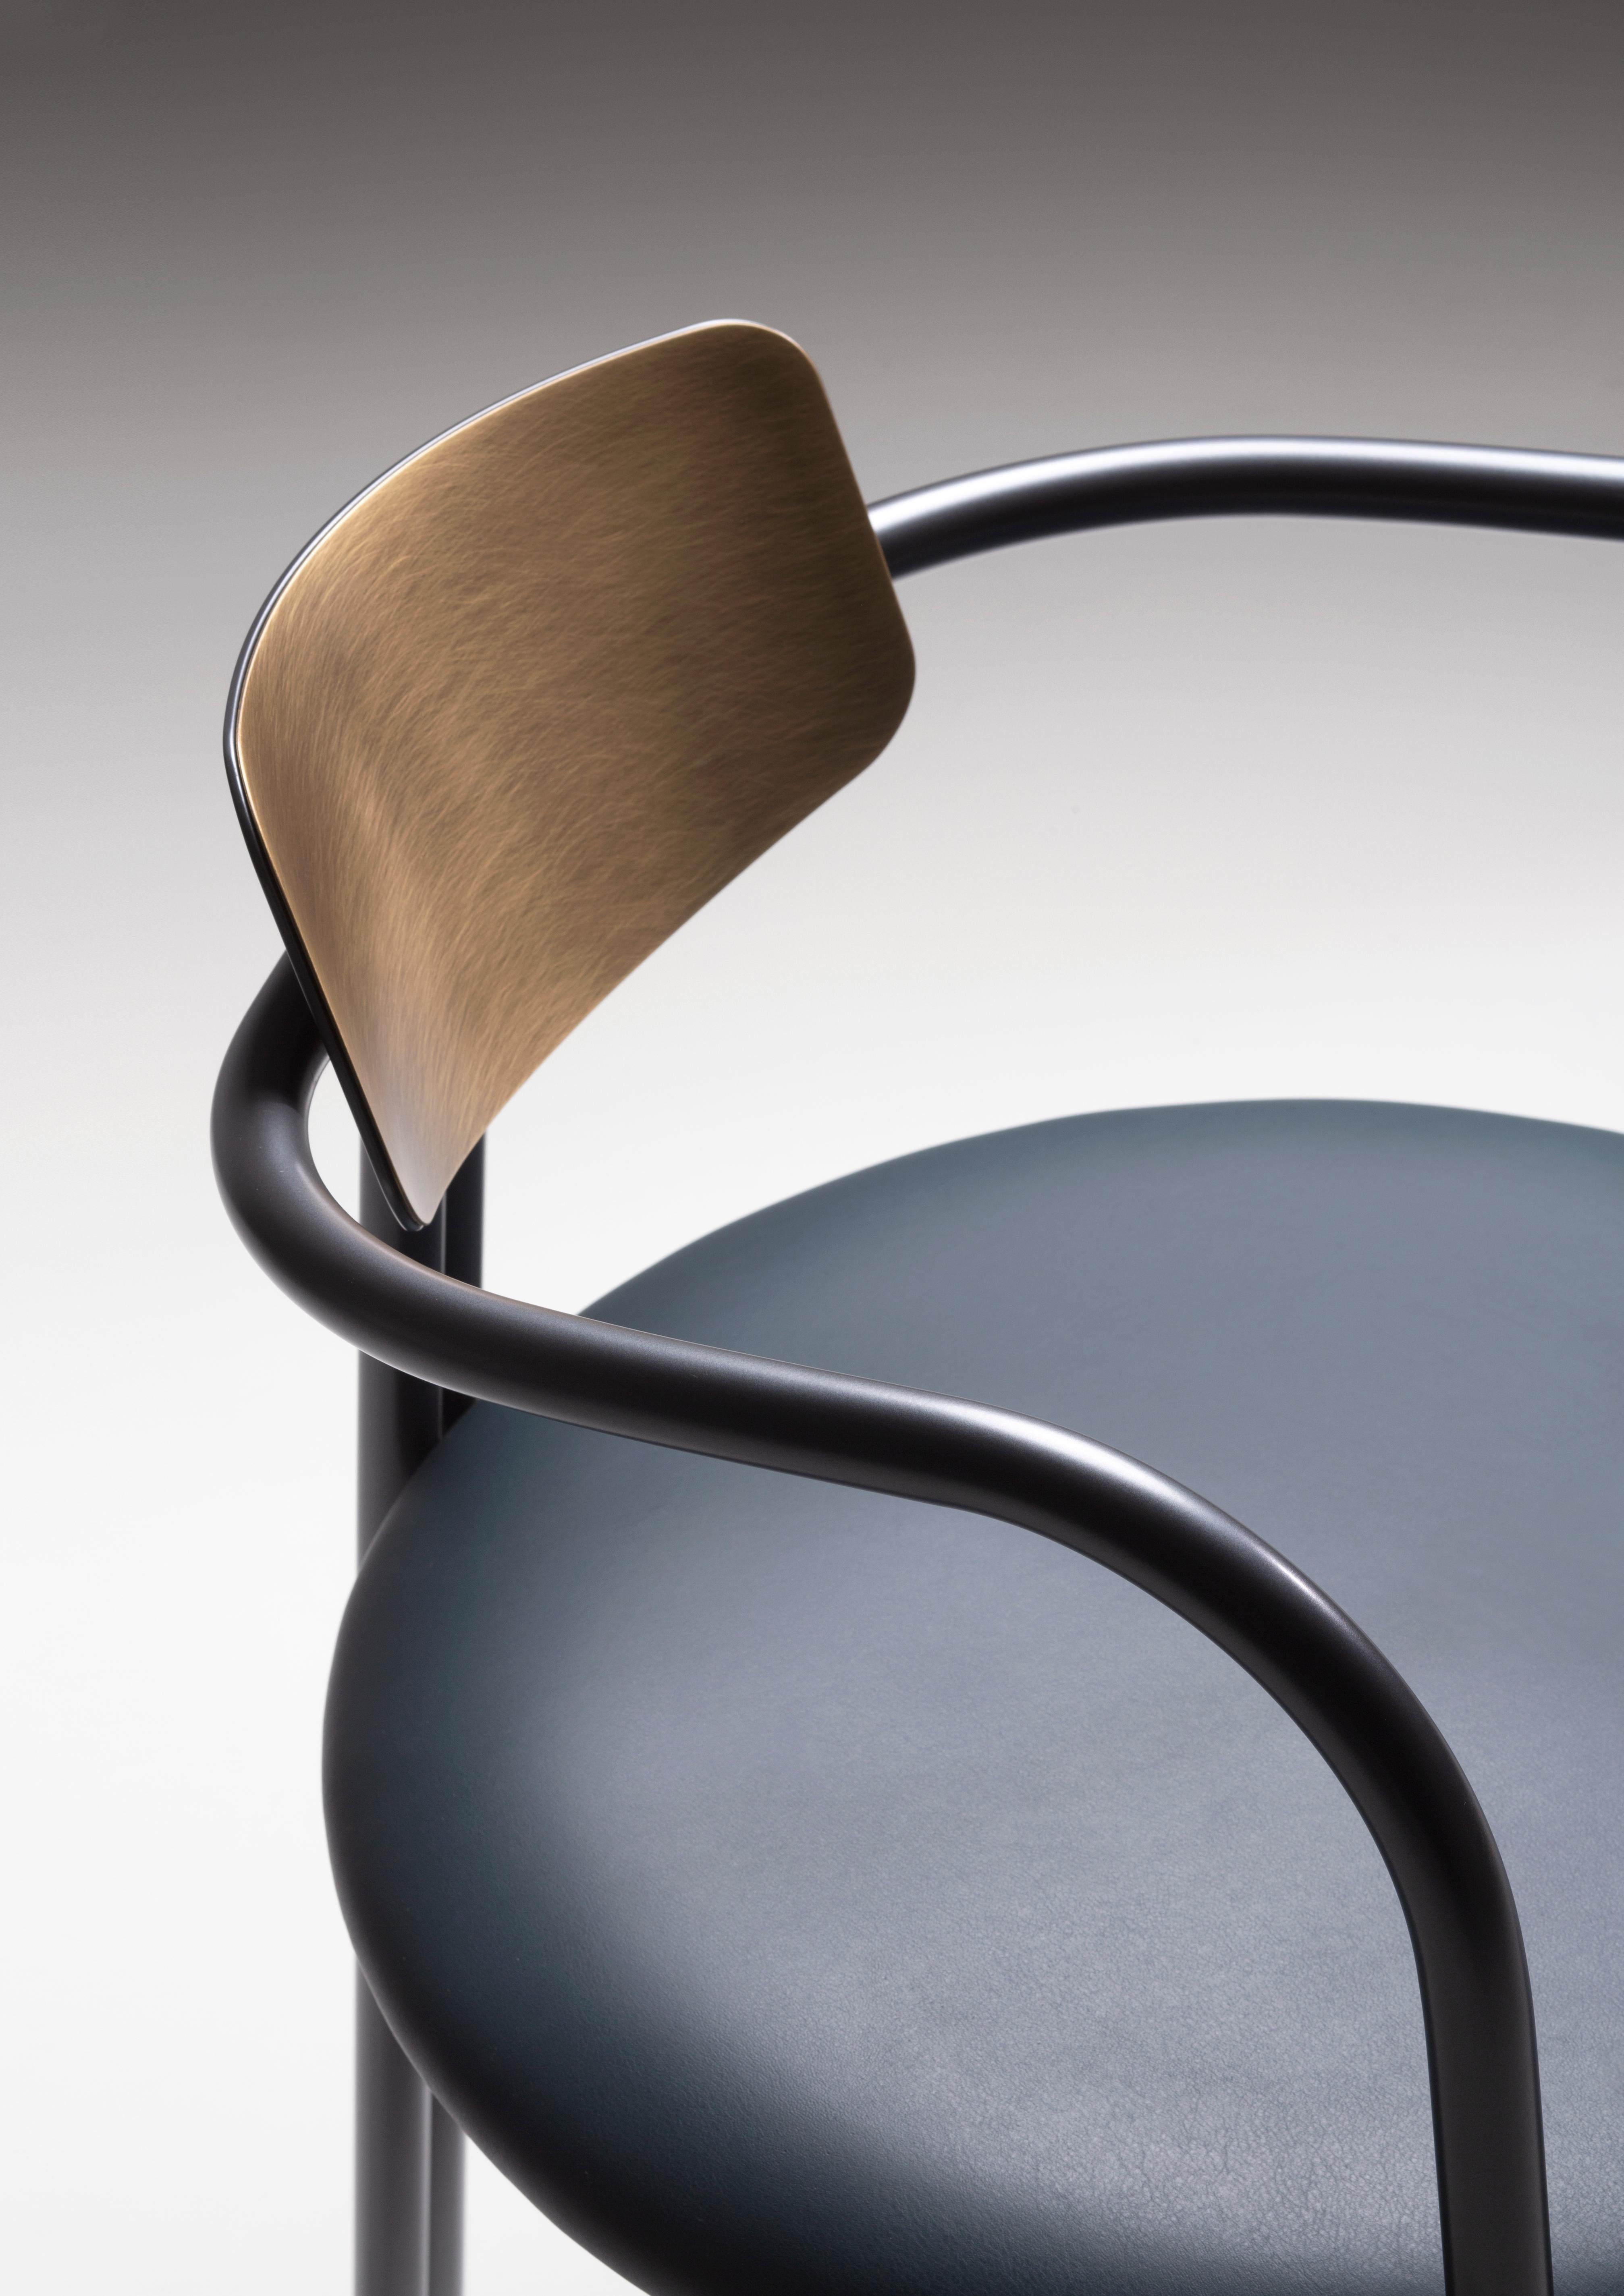 The Via Veneto seat is inspired by the 1960s and recalls the atmosphere of the Roman “dolce vita”. The double symmetrical tubular structure in painted stainless steel designs the feet and armrests, which support the soft leather upholstered seat and